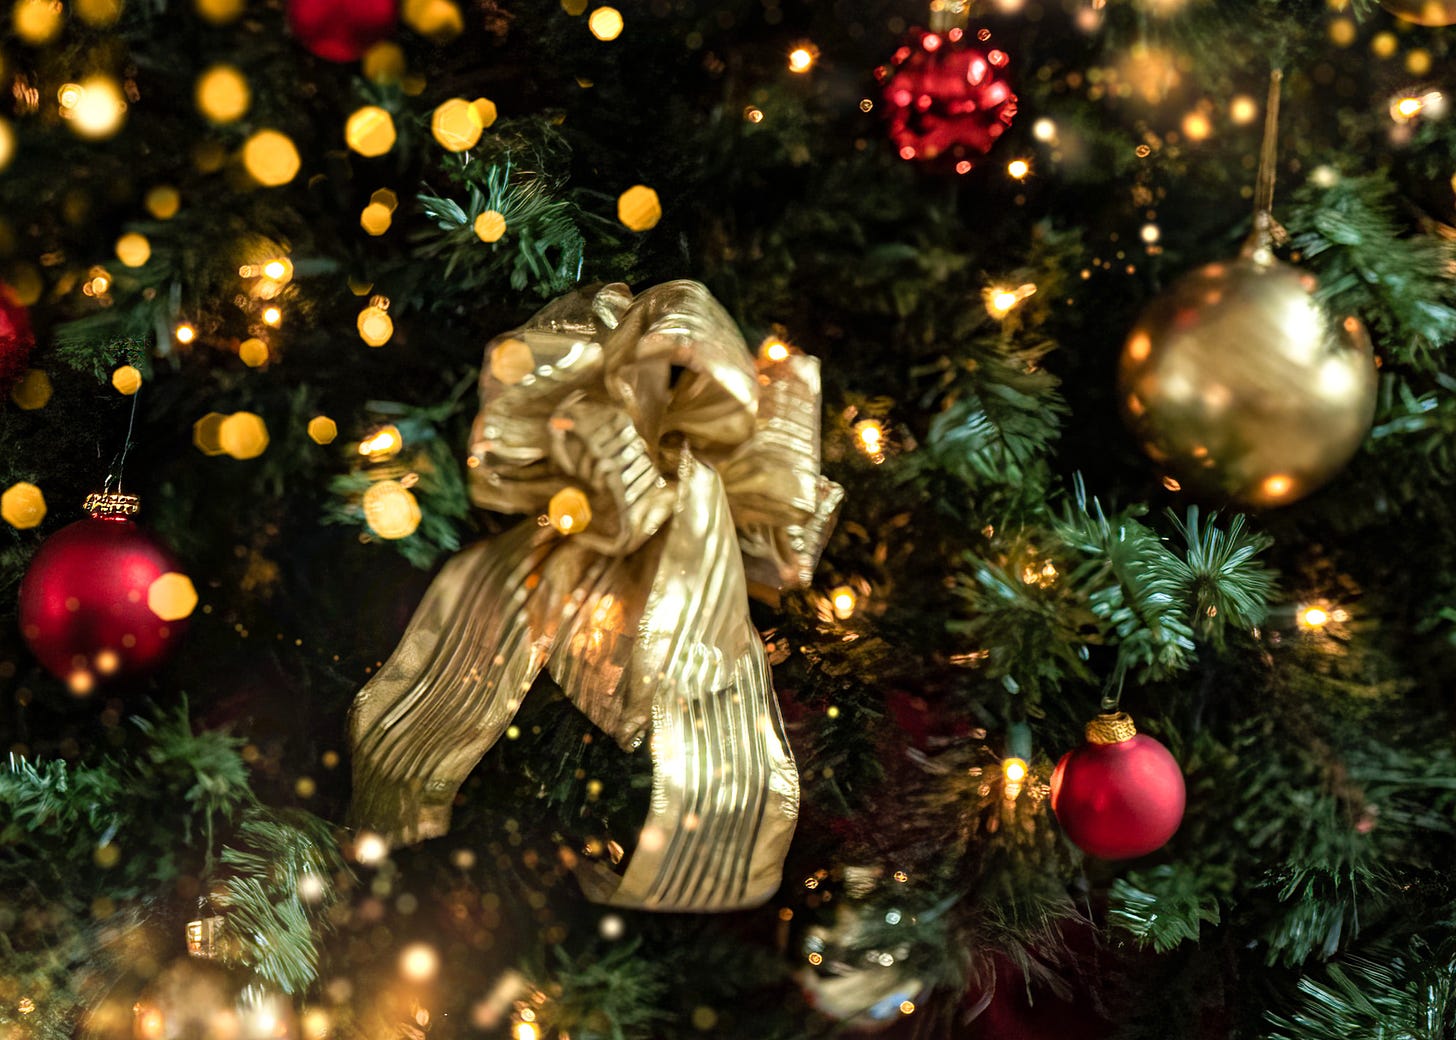 A gold bow on a green Christmas tree with twinkling lights and red and green ball ornaments